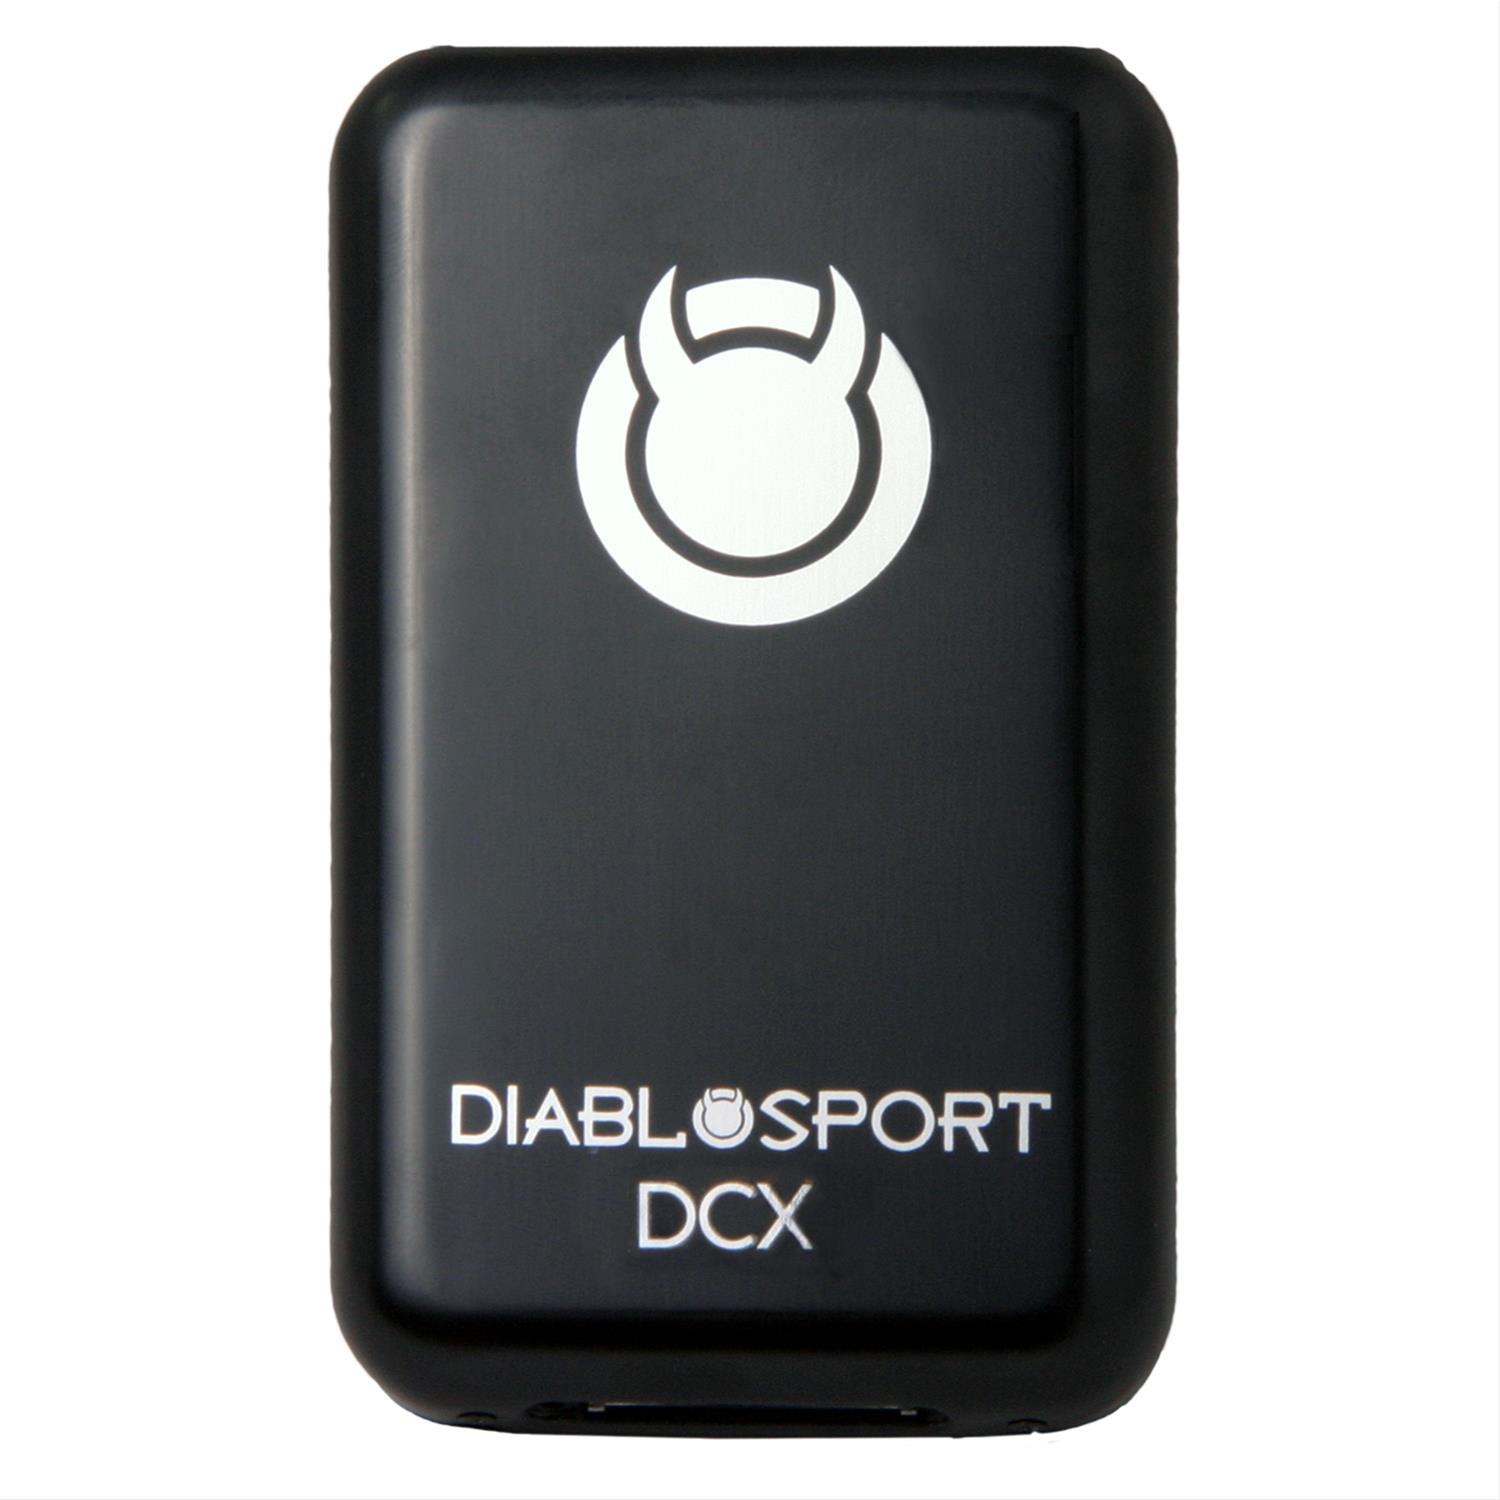 diablosport t1000 not being picked up by computer